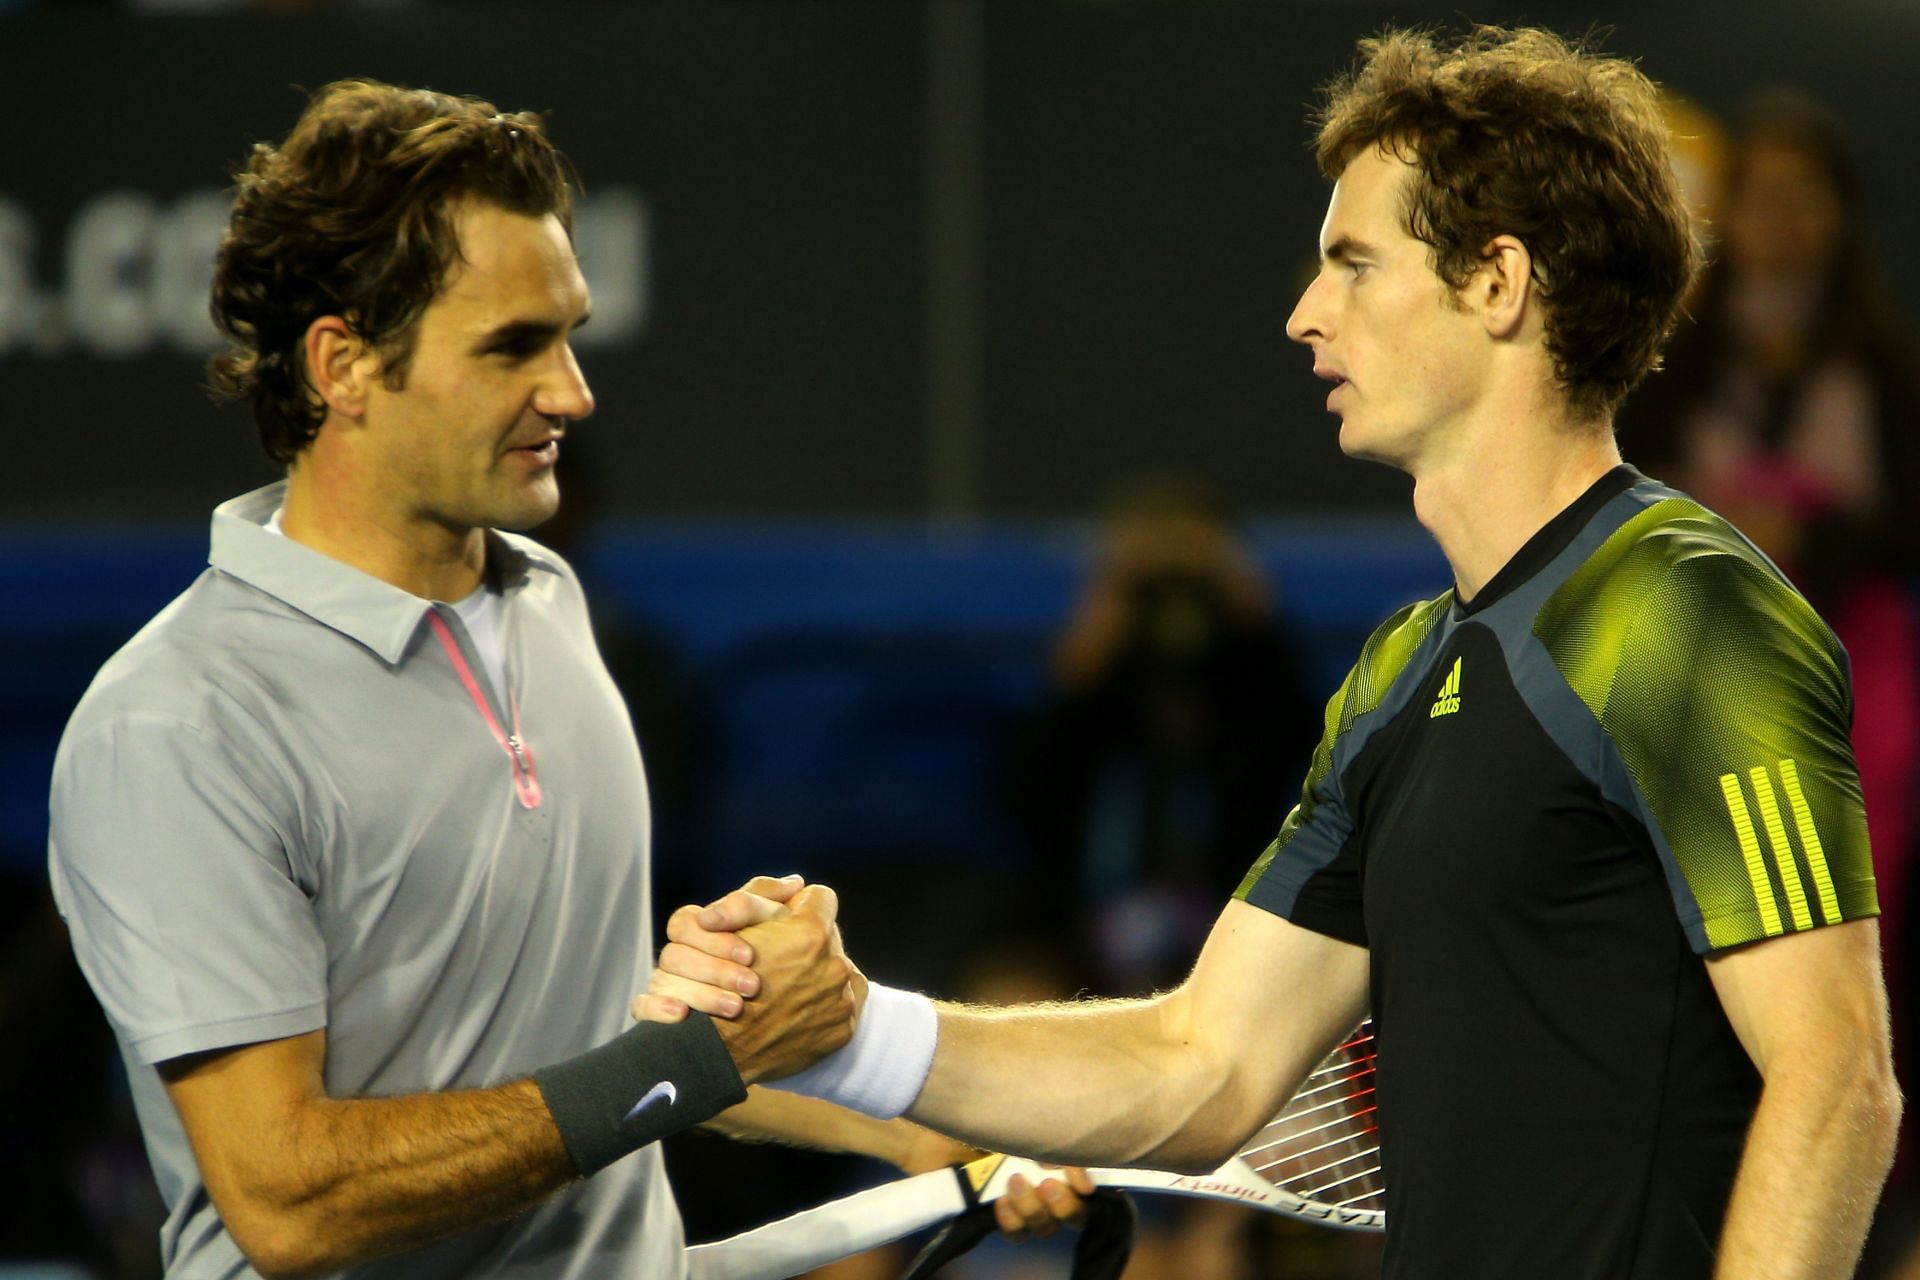 Roger Federer and Andy Murray pictured at the 2013 Australian Open - Day 12